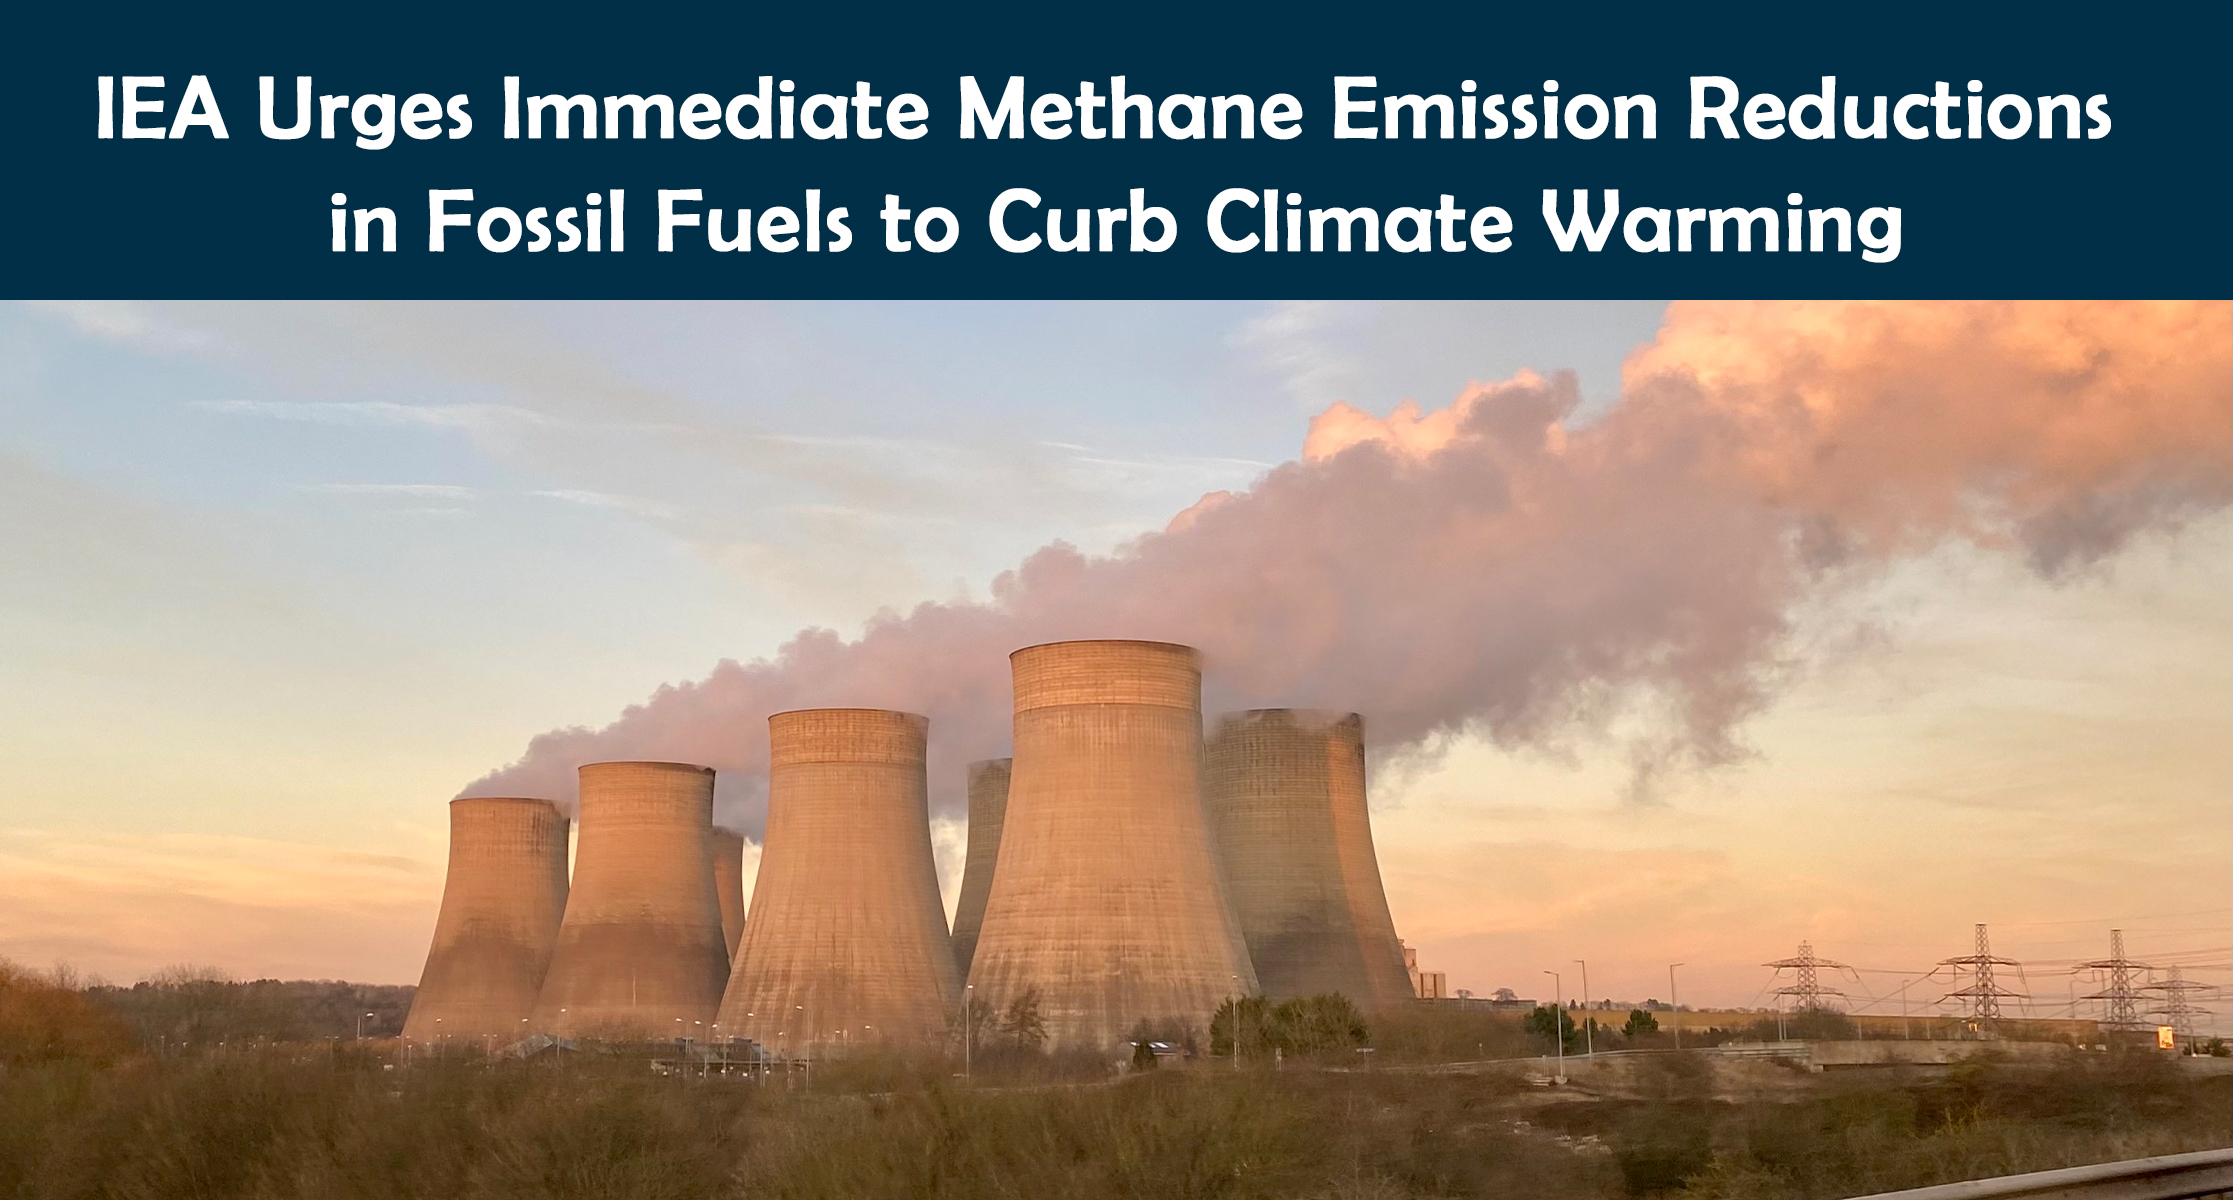 IEA Urges Immediate Methane Emission Reductions in Fossil Fuels to Curb Climate Warming